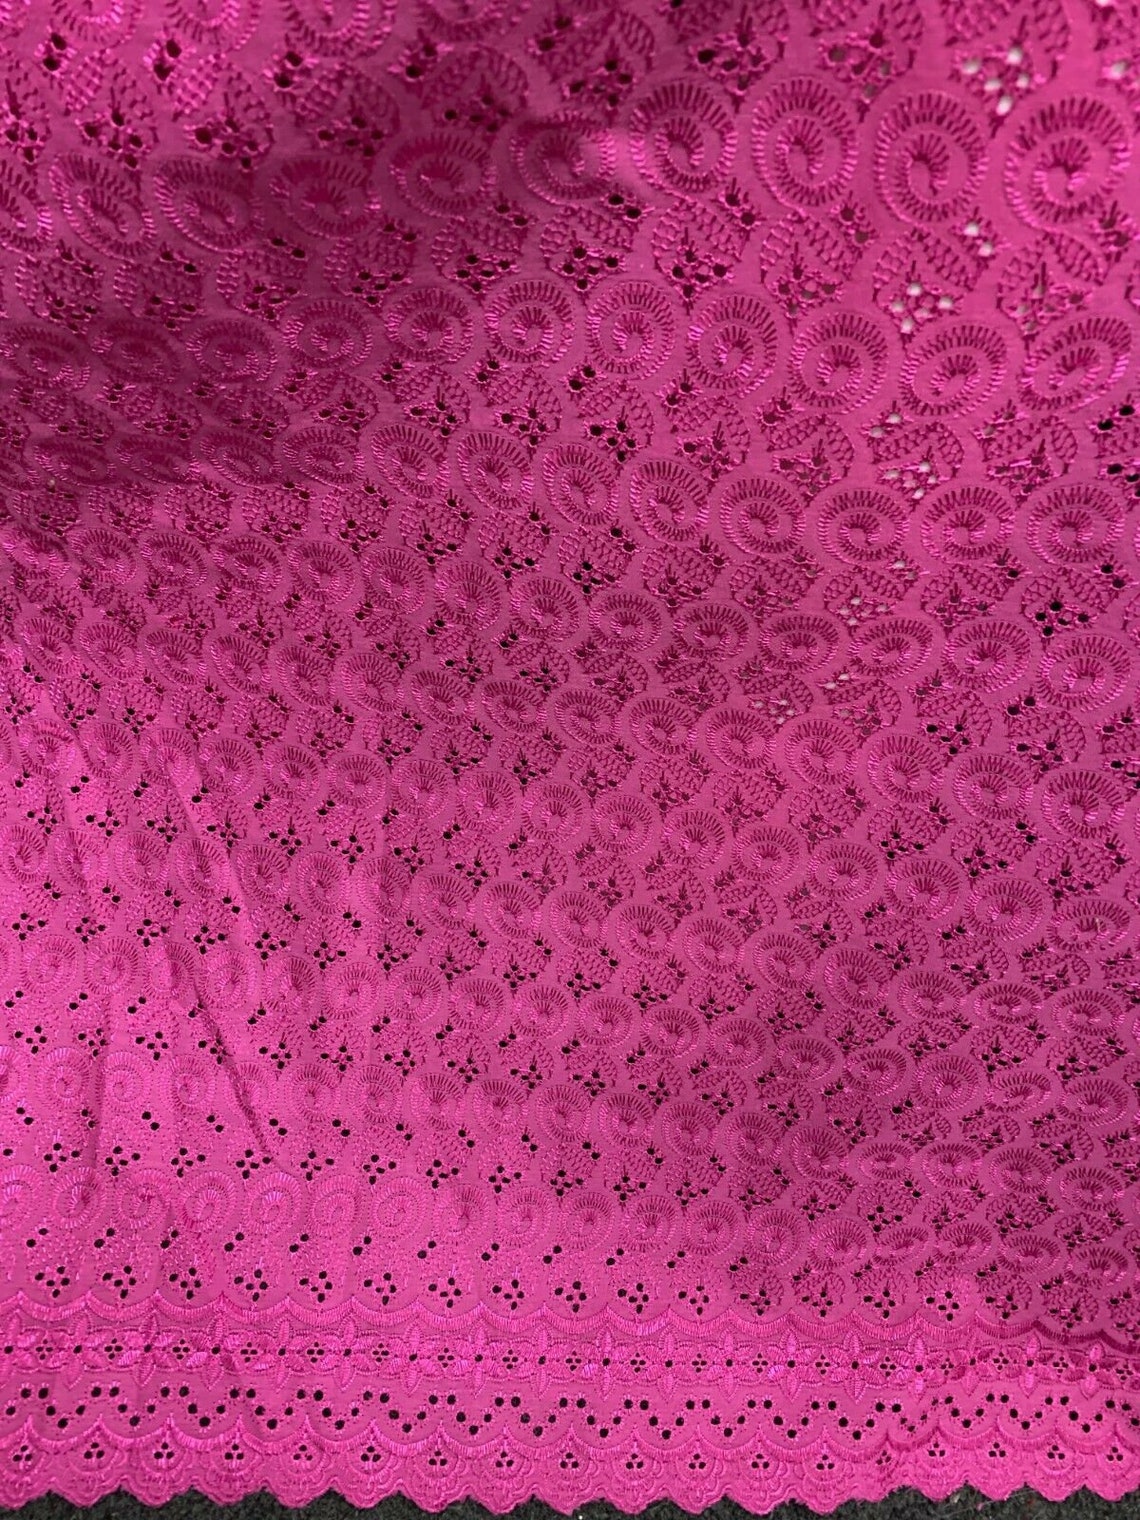 FUCHSIA PINK Floral Cotton Eyelet Embroidered Fabric 45 In. - Etsy